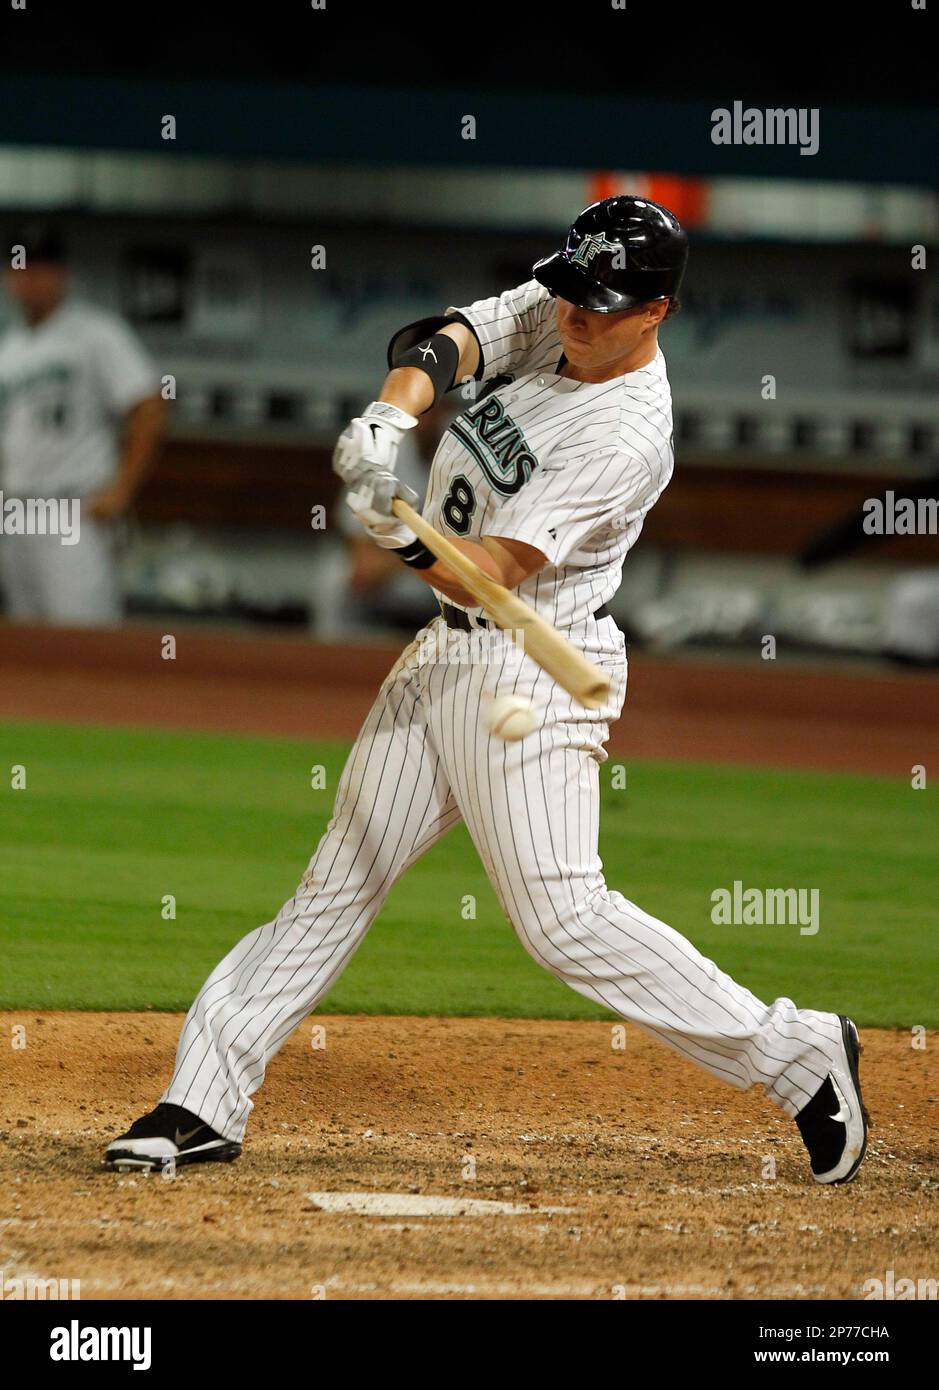 Miami Marlins Chris Coghlan during a game against the New York Yankees in  Miami,Florida on April 1,2012 at Marlins Park.(AP Photo/Tom DiPace Stock  Photo - Alamy